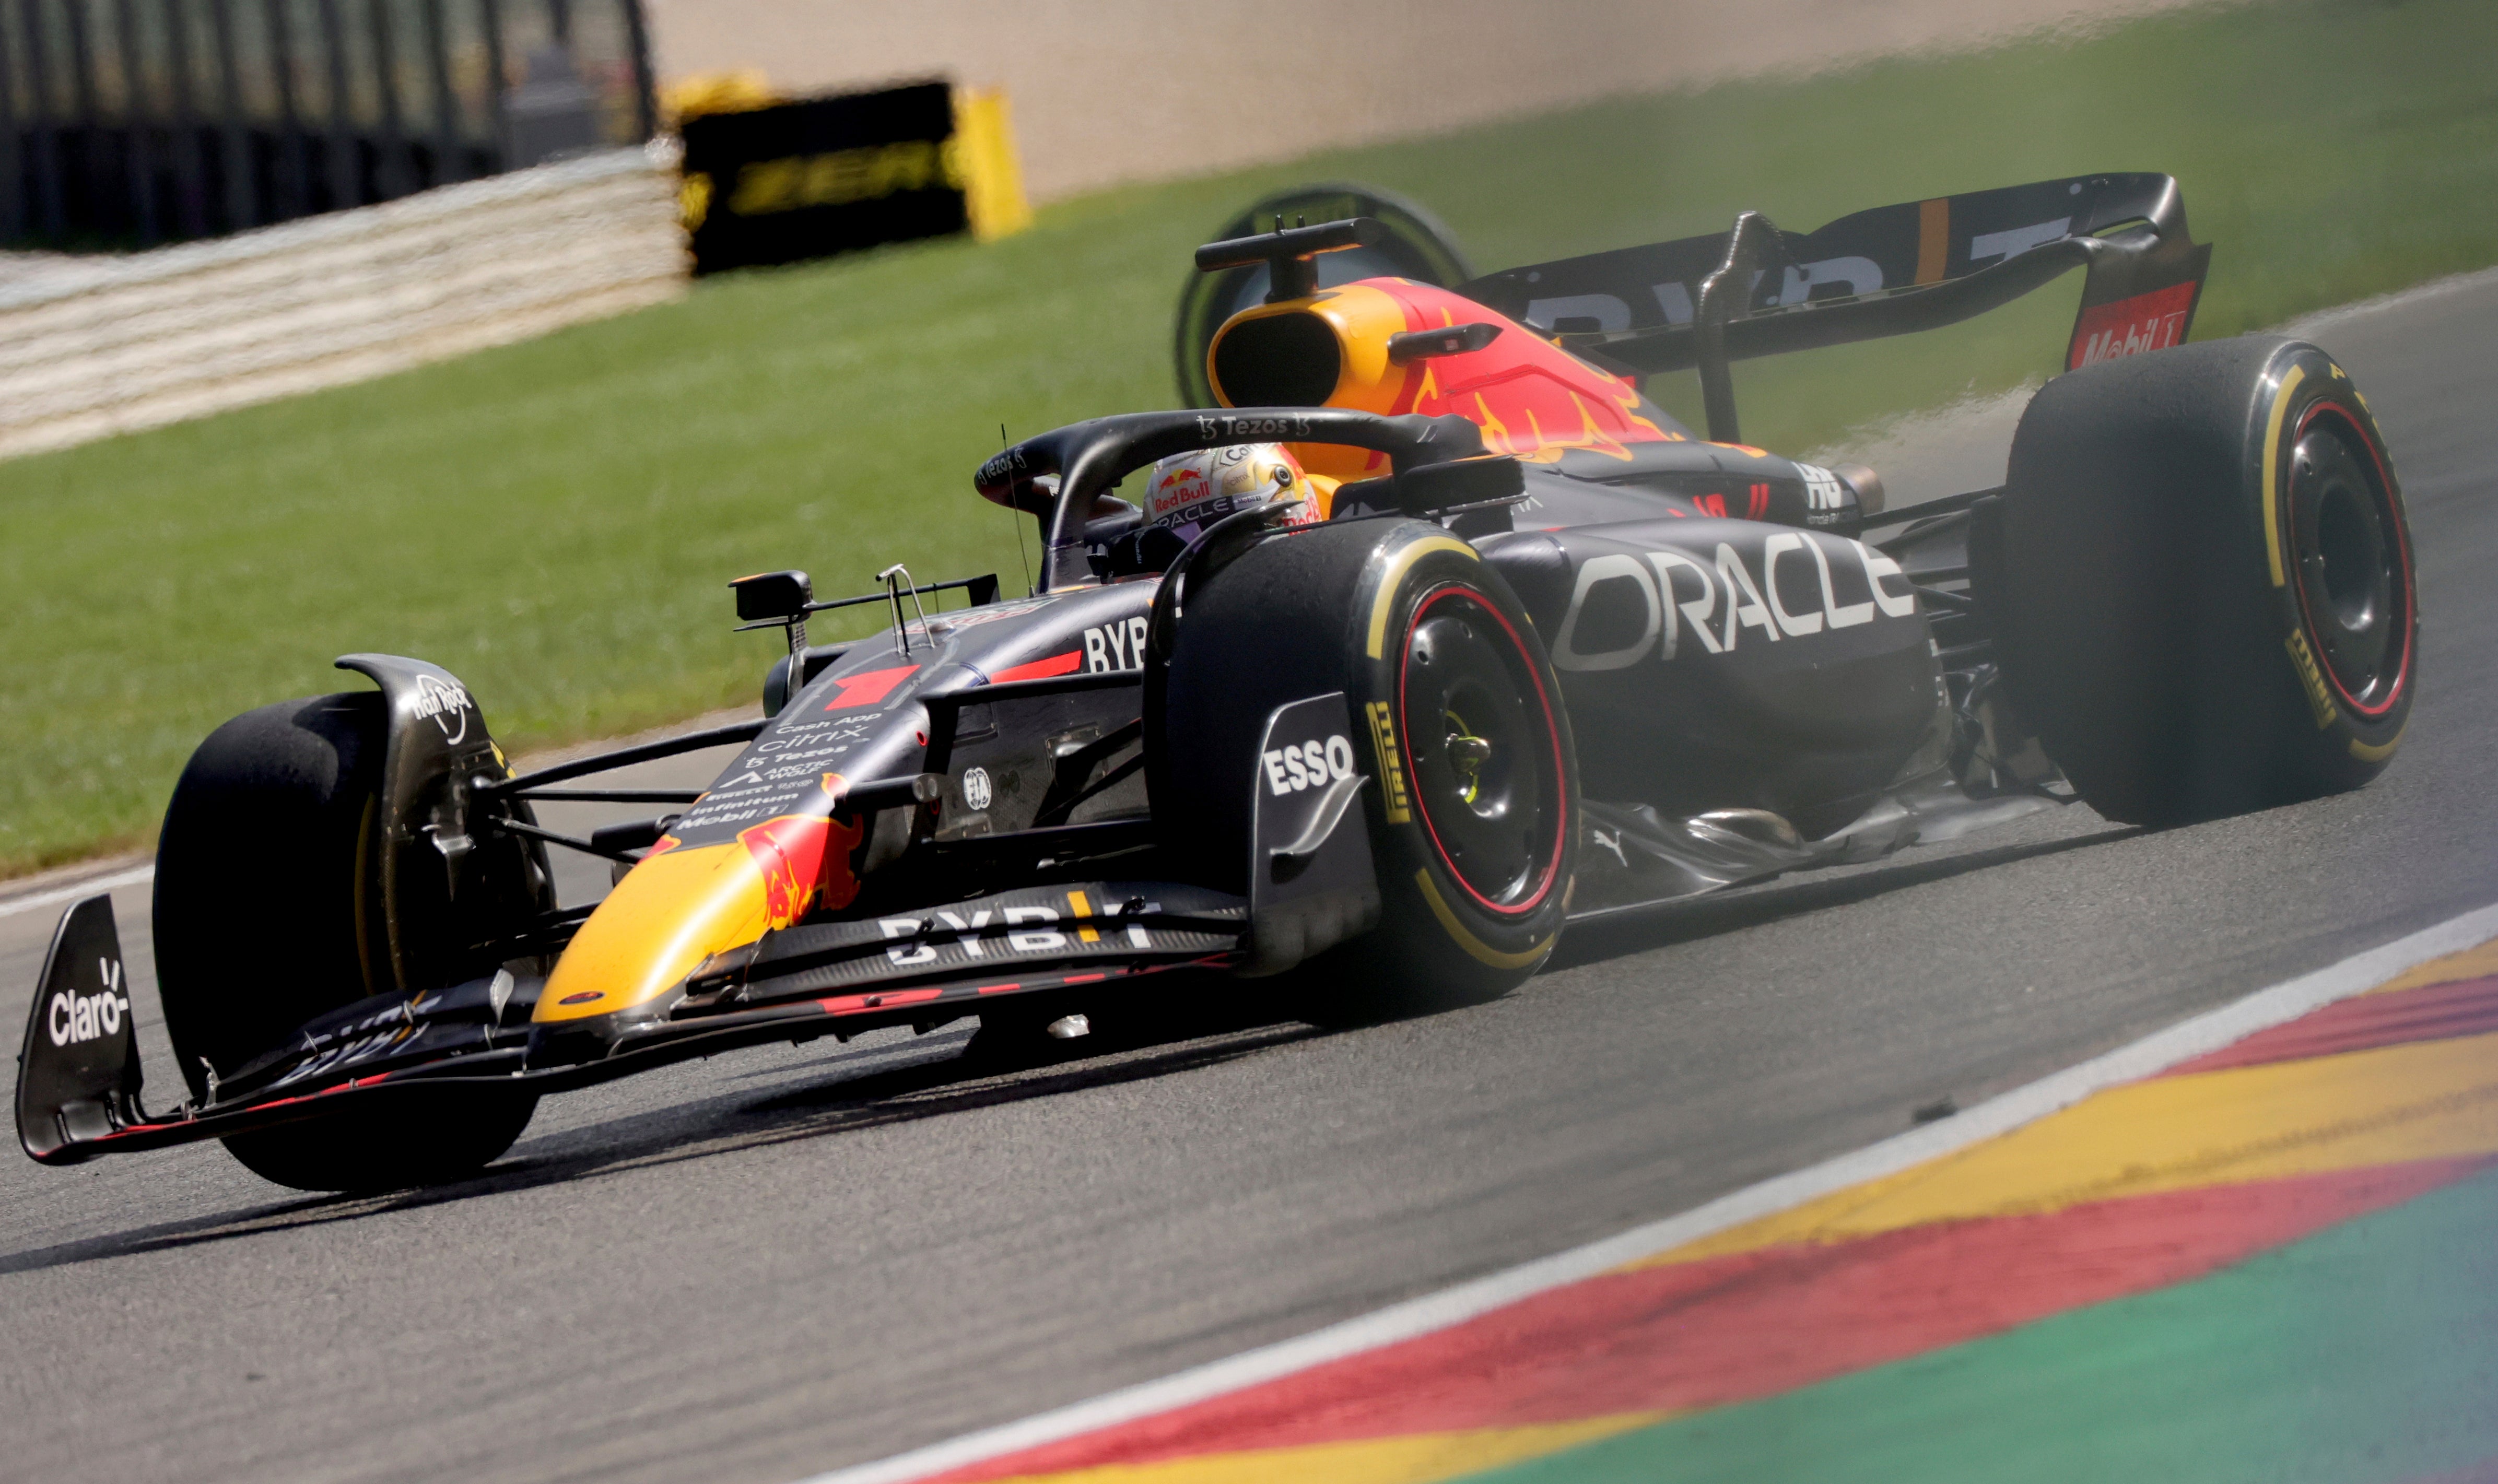 Max Verstappen’s Red Bull was in a league of its own in Belgium last weekend